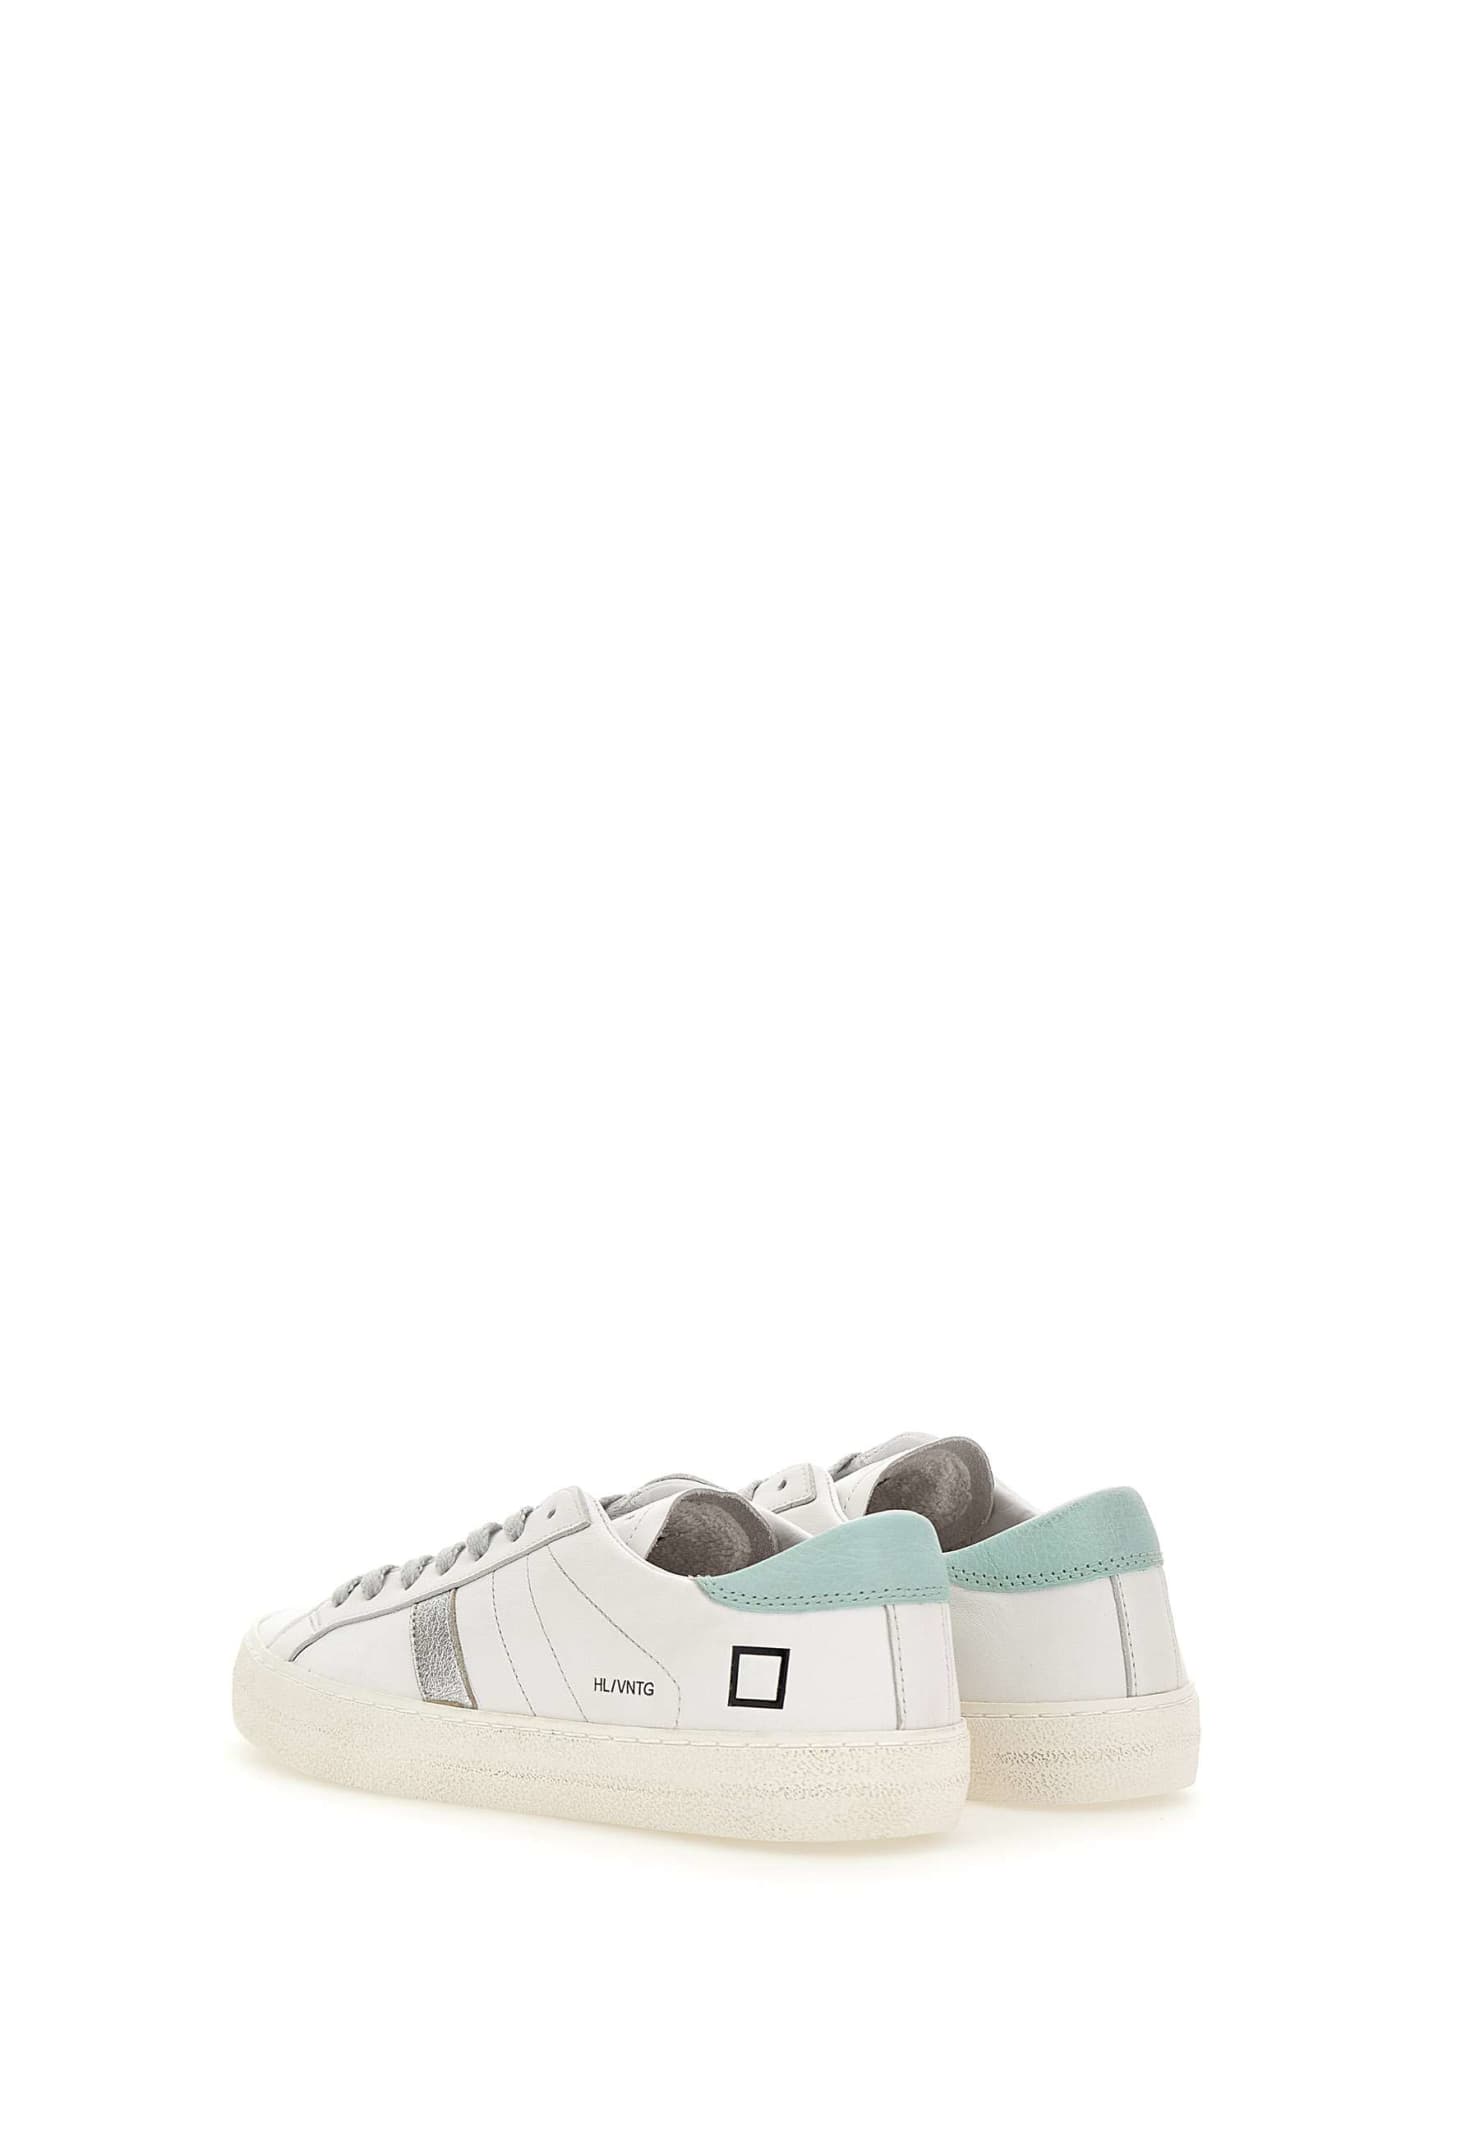 Shop Date Hillow Vintage Sneakers In White